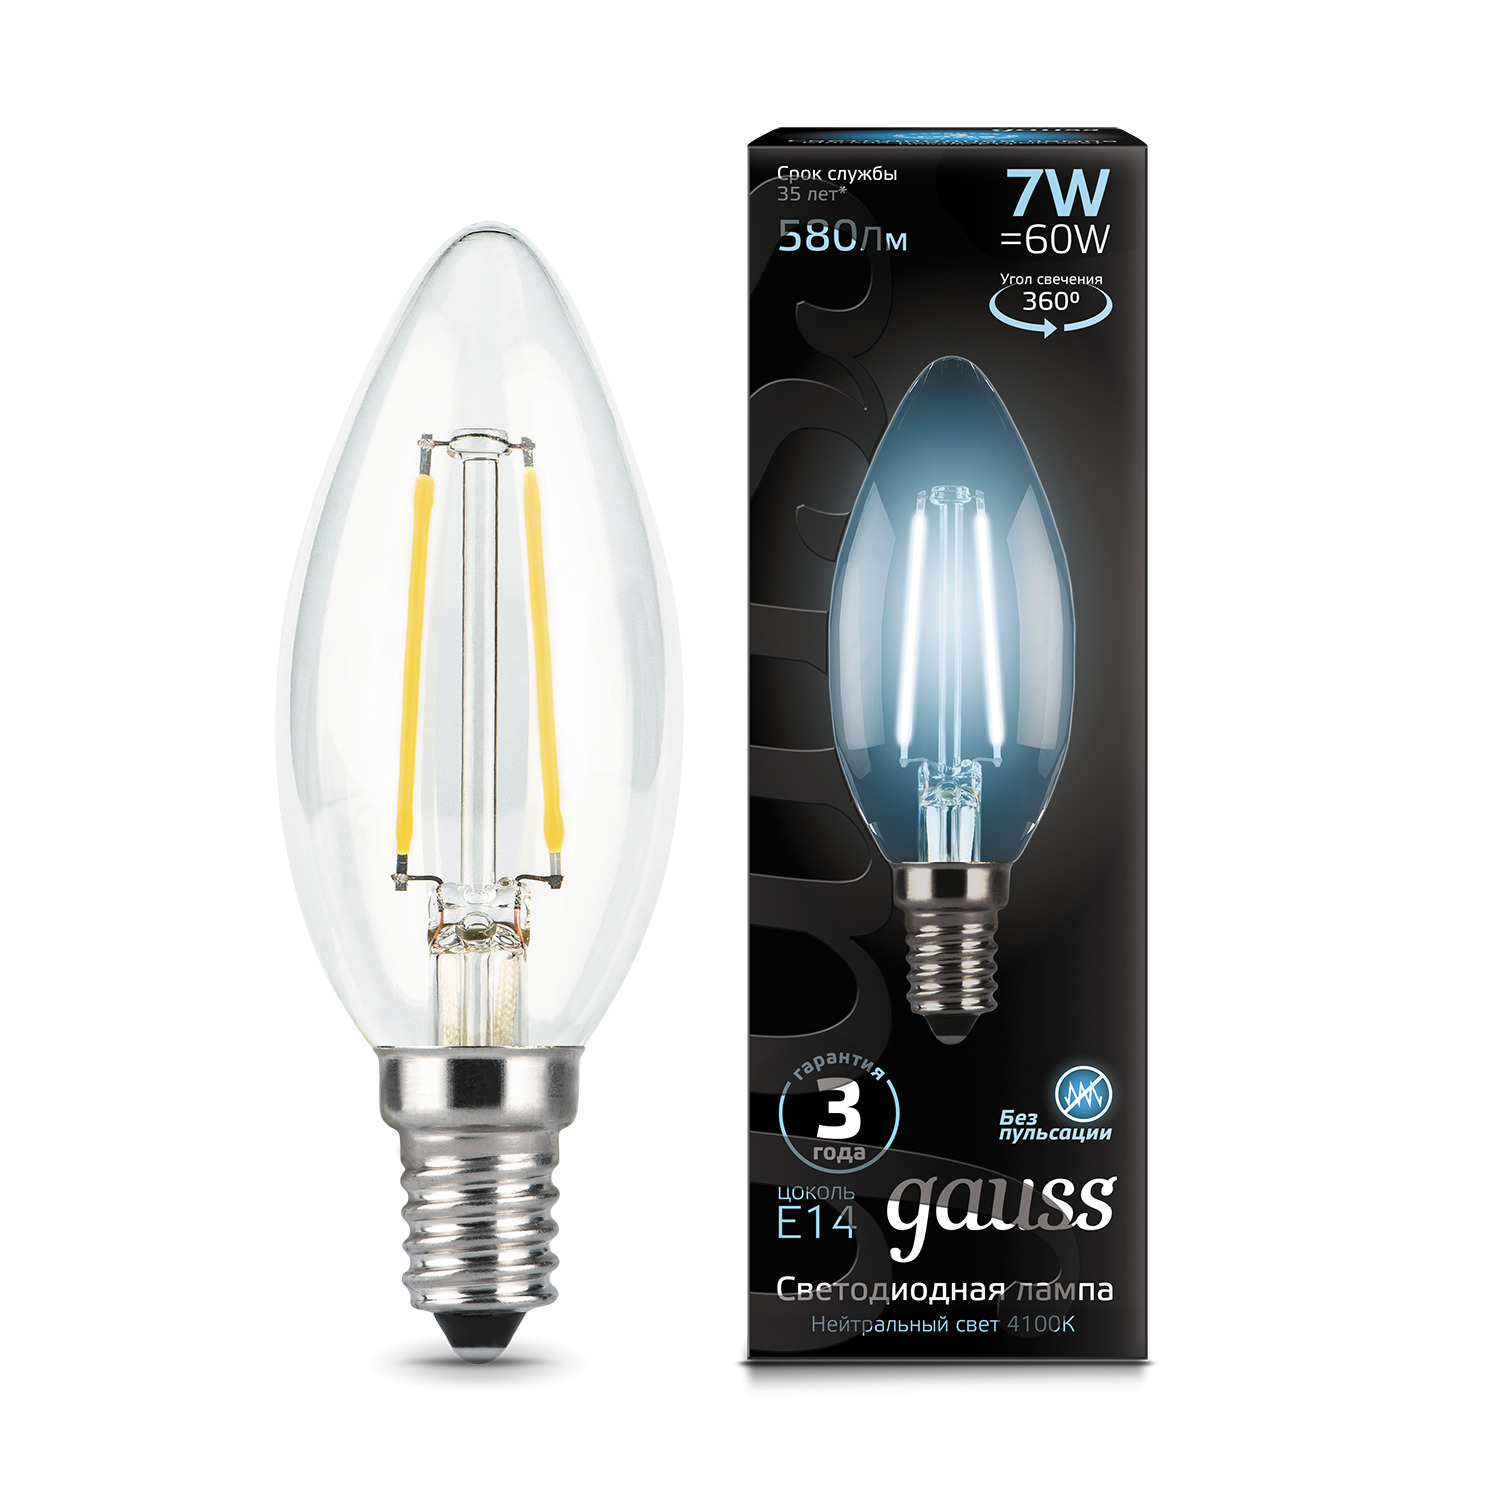 Лампа Gauss LED Filament Candle E14 7W 4100К лампа gauss led filament свеча e14 7w 580lm 4100к step dimmable 1 10 50